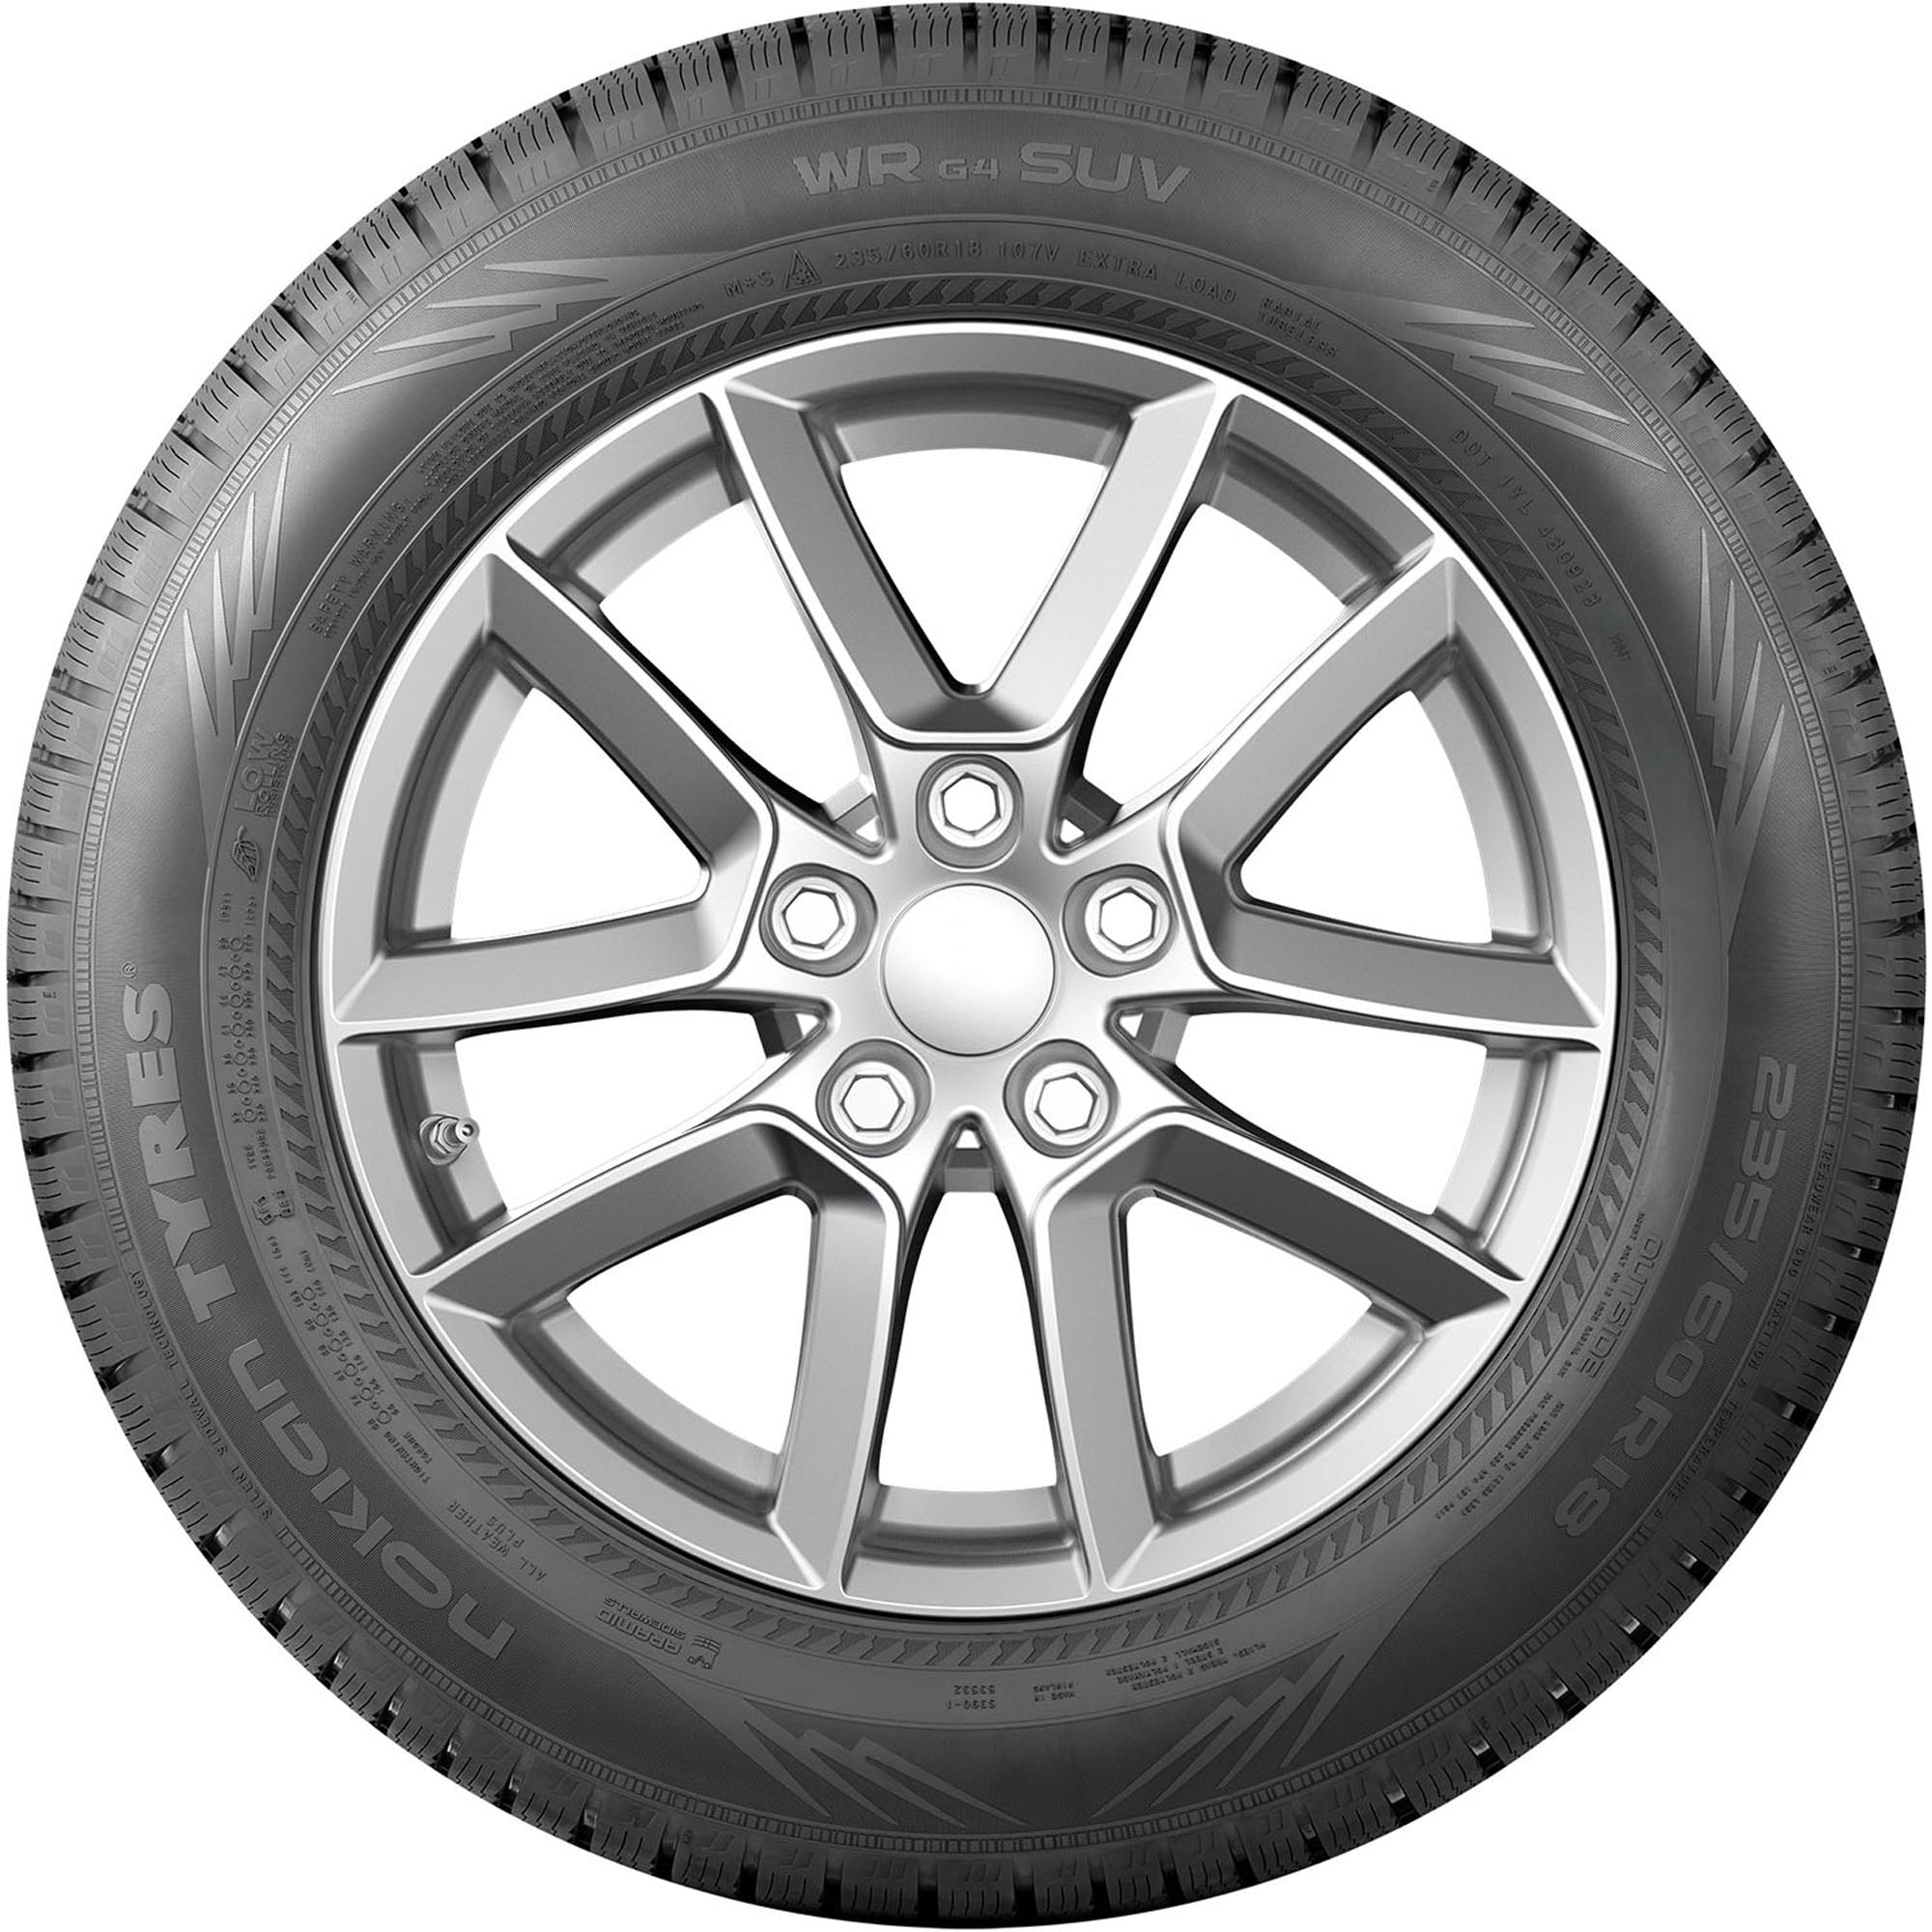 Nokian WR G4 SUV All Weather 235/70R16 106H SUV/Crossover Tire